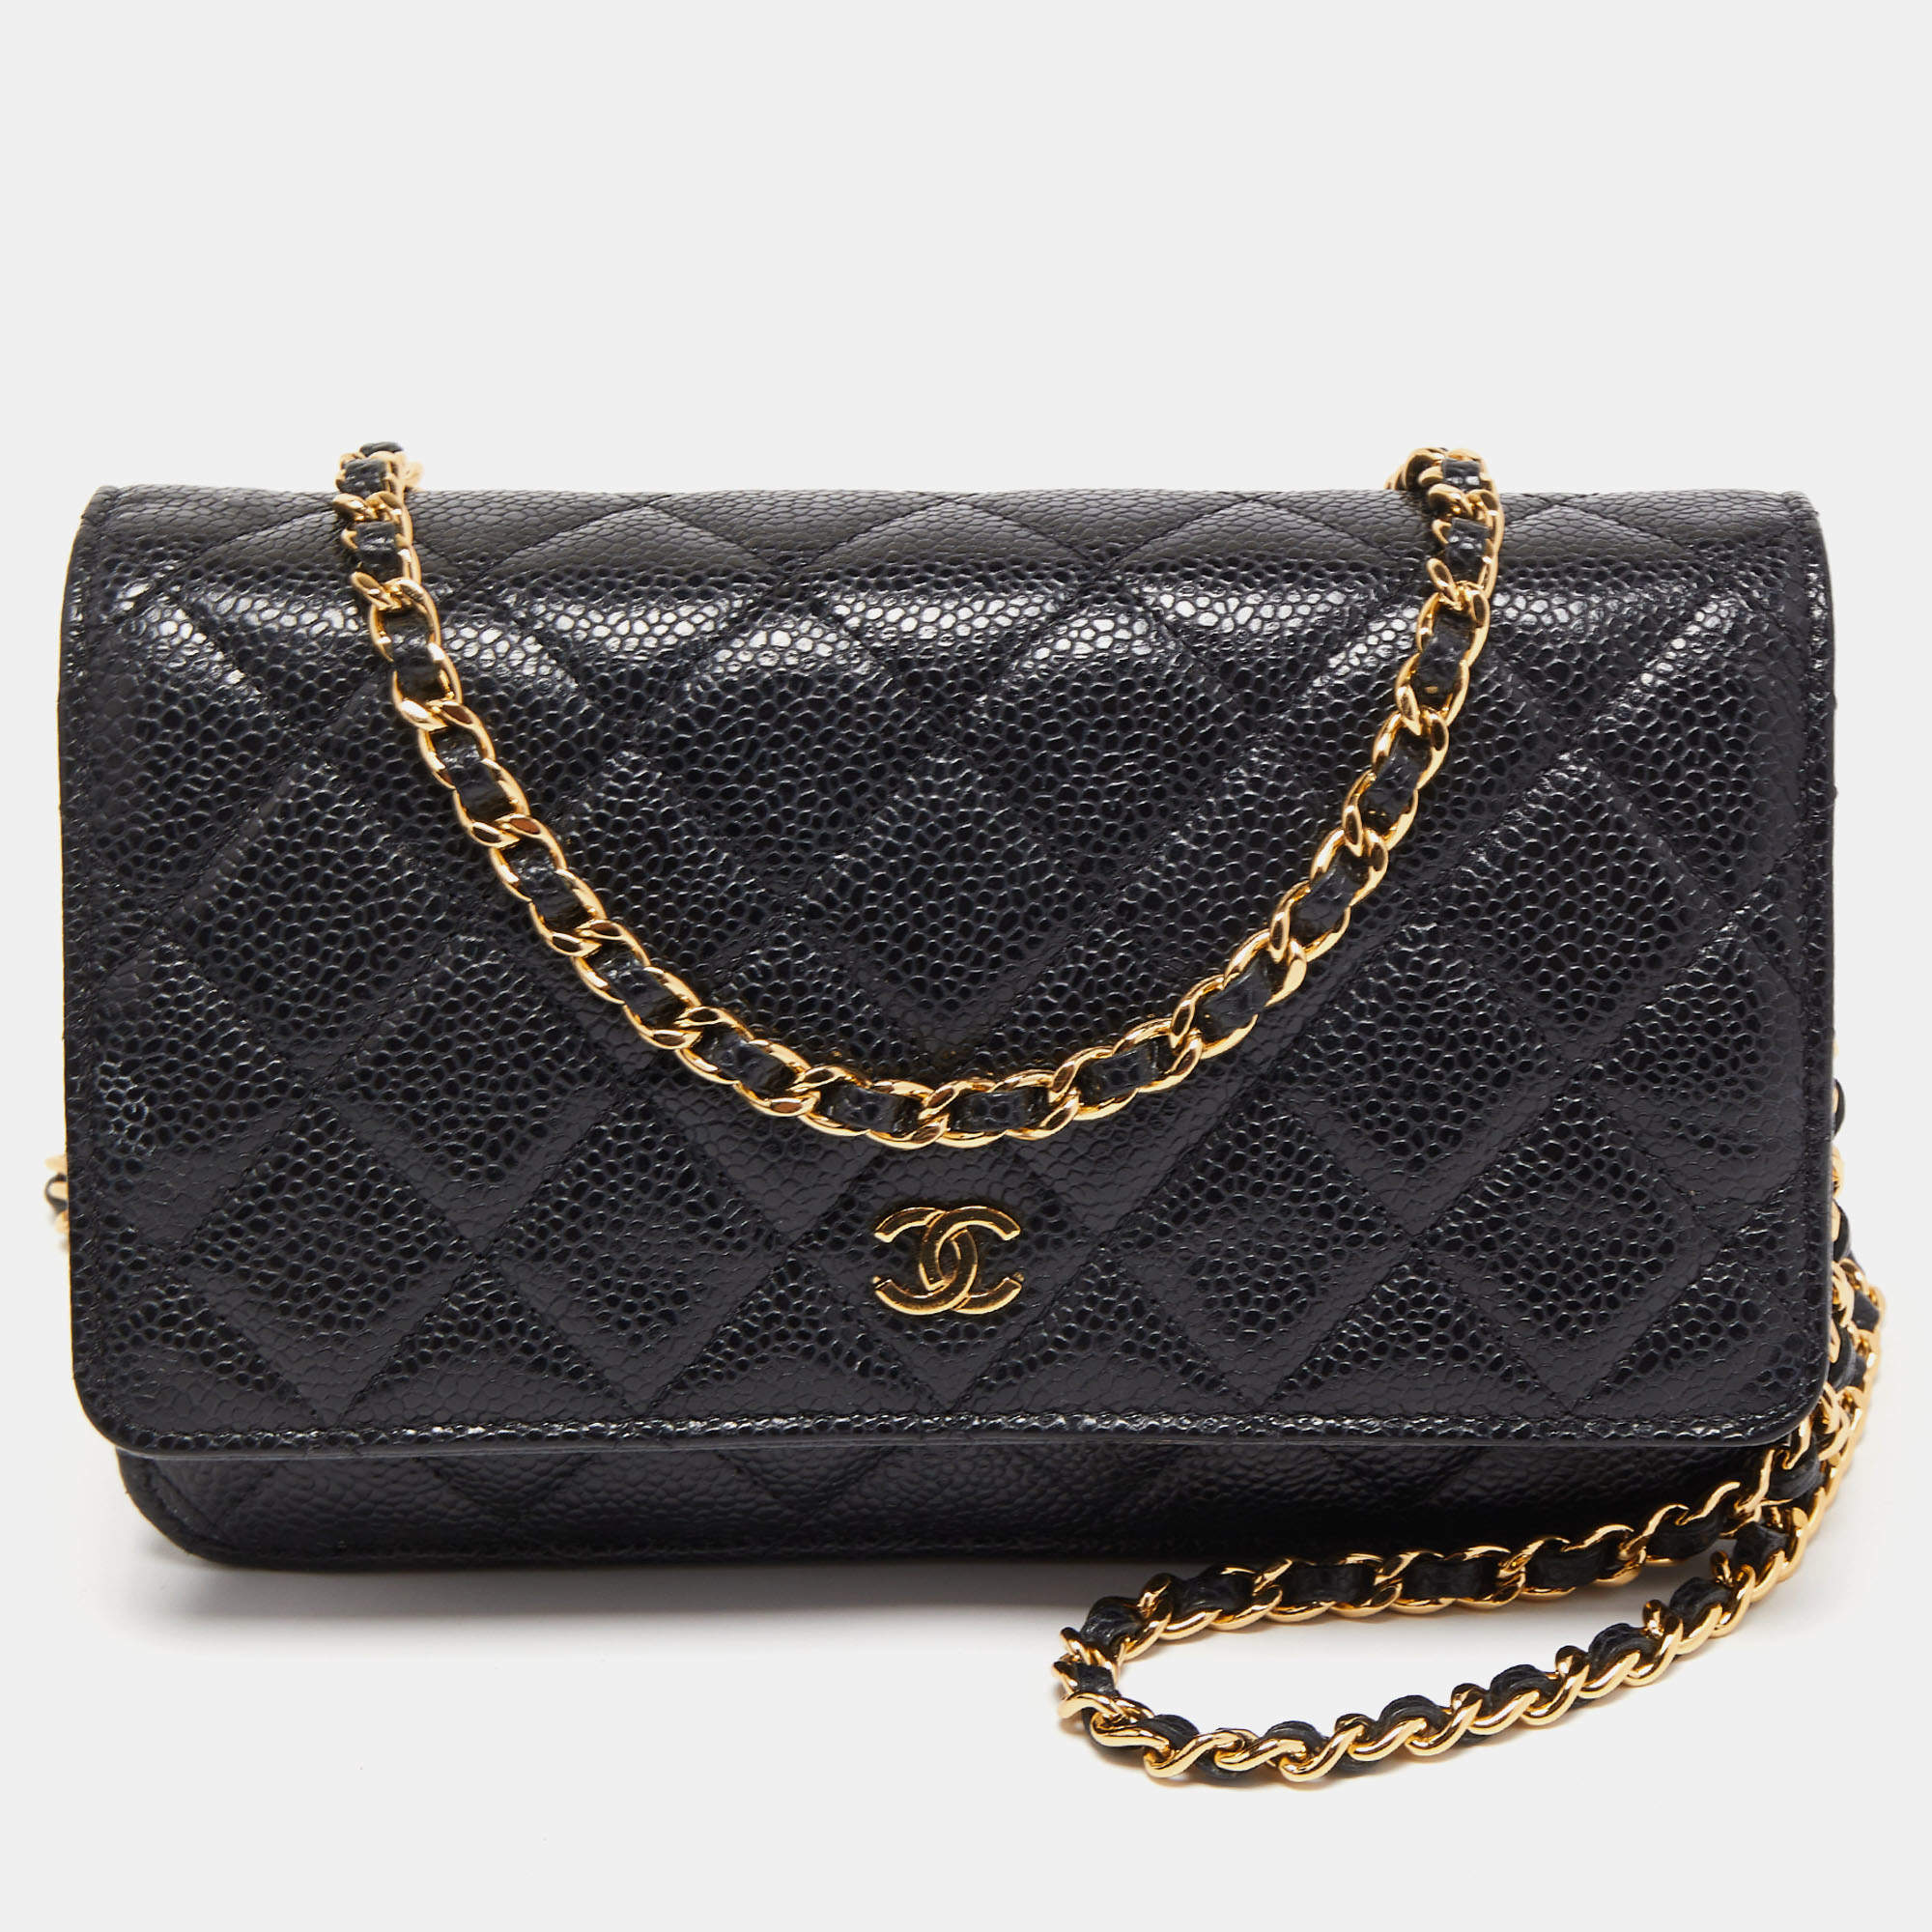 Chanel Black Quilted Caviar Leather Classic WOC Bag